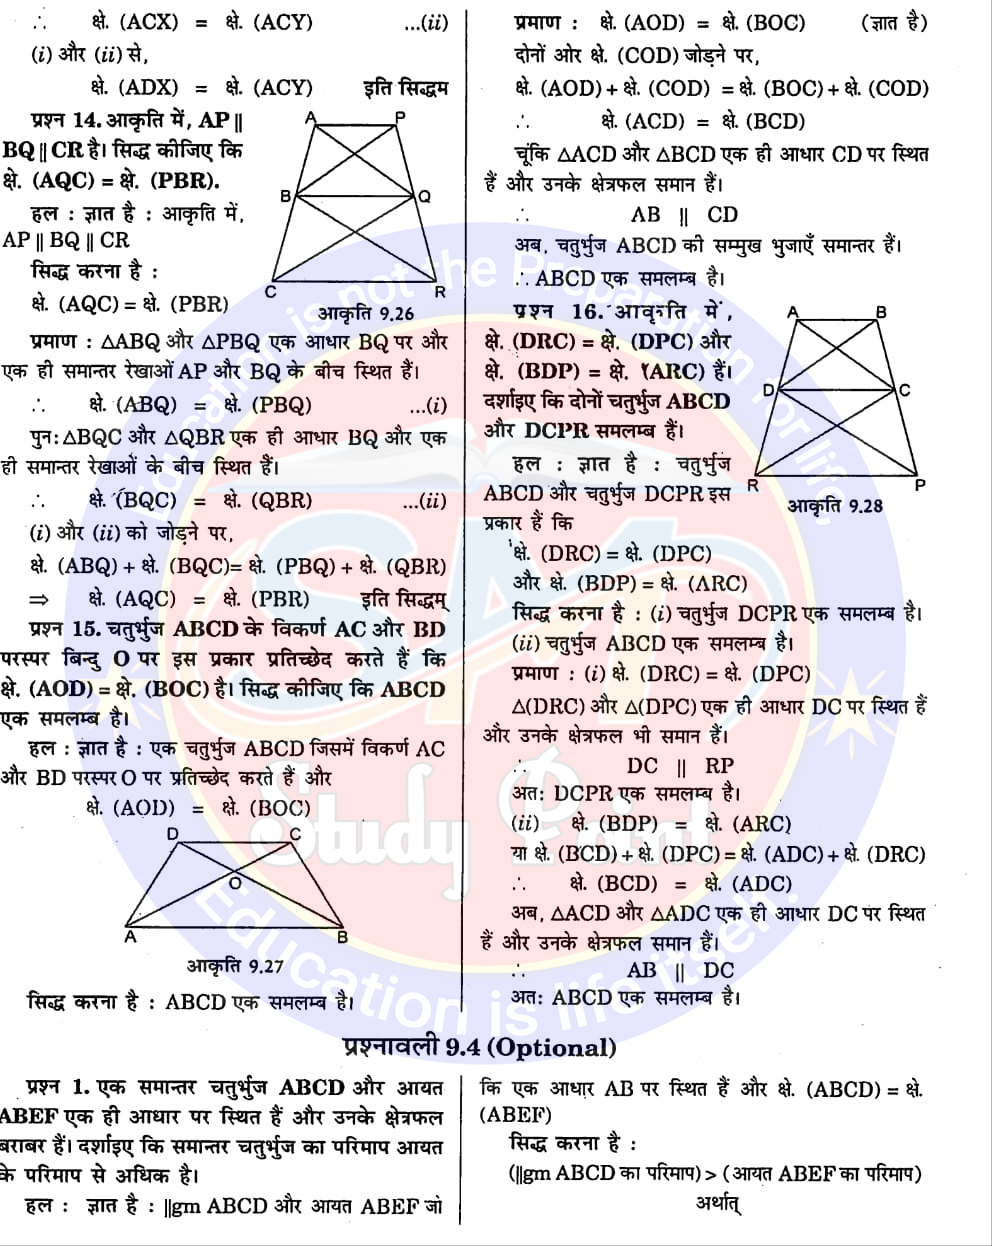 Bihar Board NCERT Math Solution of Areas of parallelograms and triangles | Class 9th Math Chapter 9 | समान्तर चतुर्भुजों और त्रिभुजों के क्षेत्रफल सभी प्रश्नों के उत्तर | प्रश्नावली  7.1, 7.2, 7.3, 7.4, 7.5 | SM Study Point